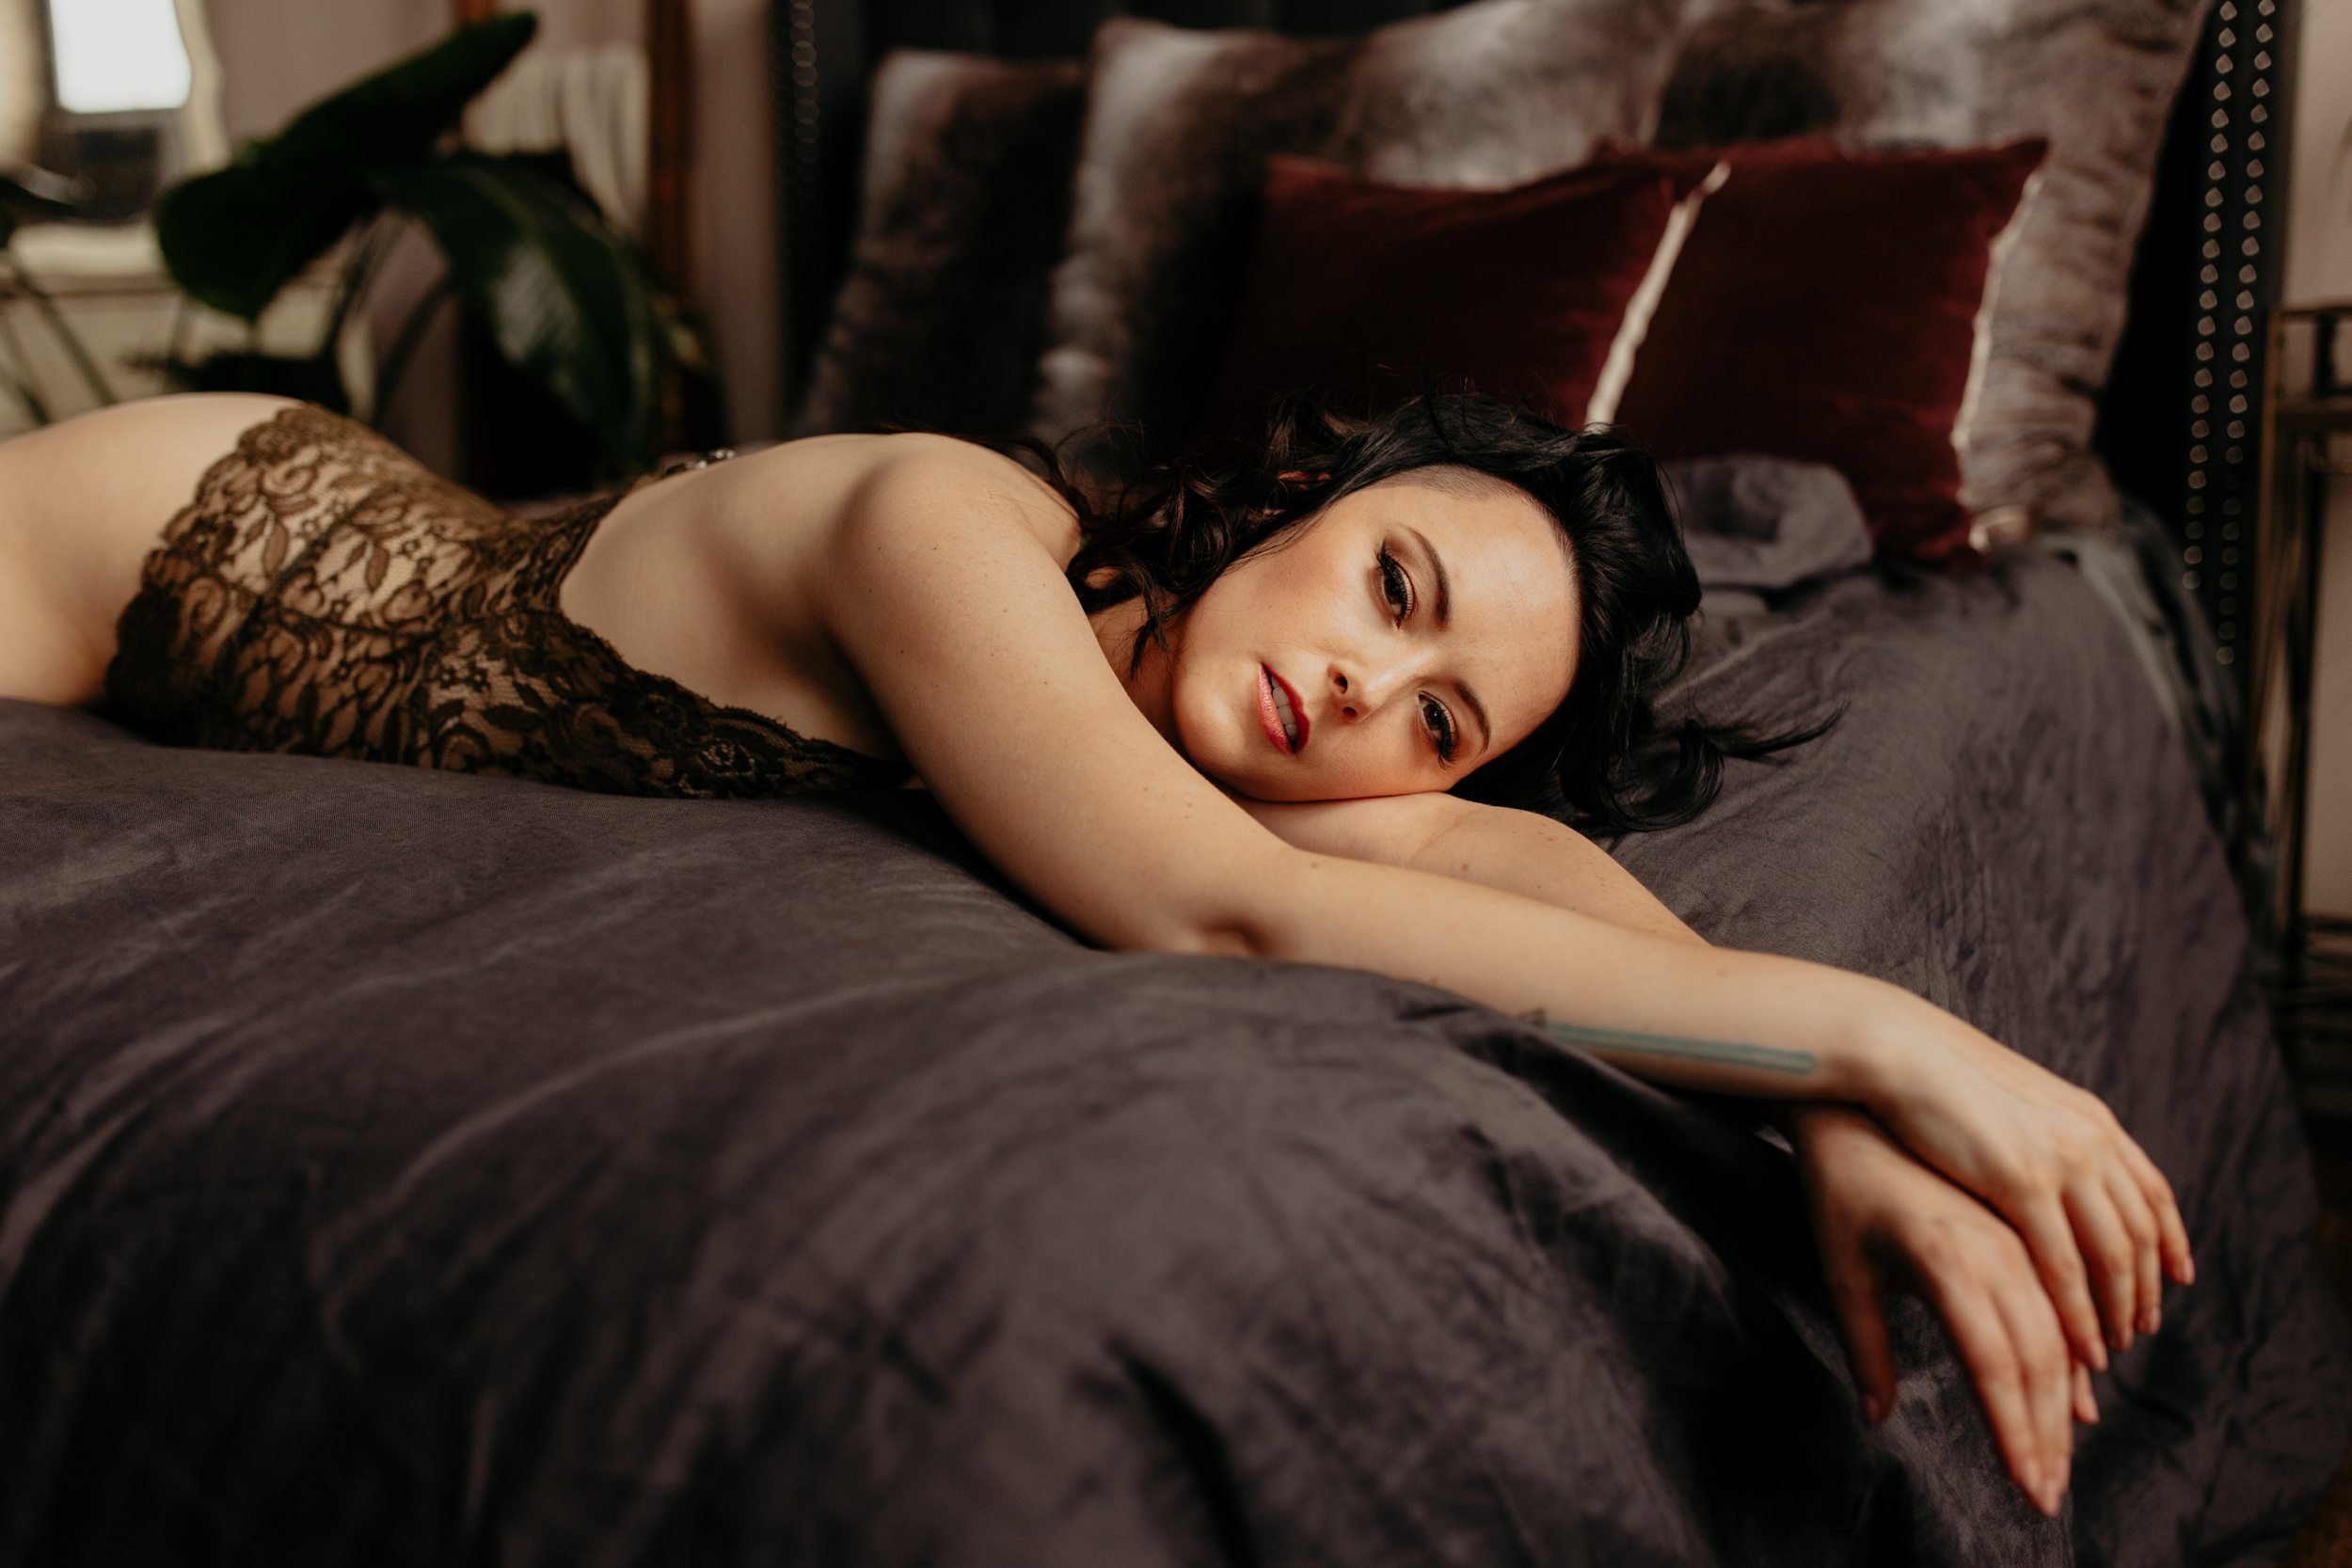 Boudoir-Style-Portraits-with-Dungeons-and-Dragons-Roleplaying-Props-0002.JPG